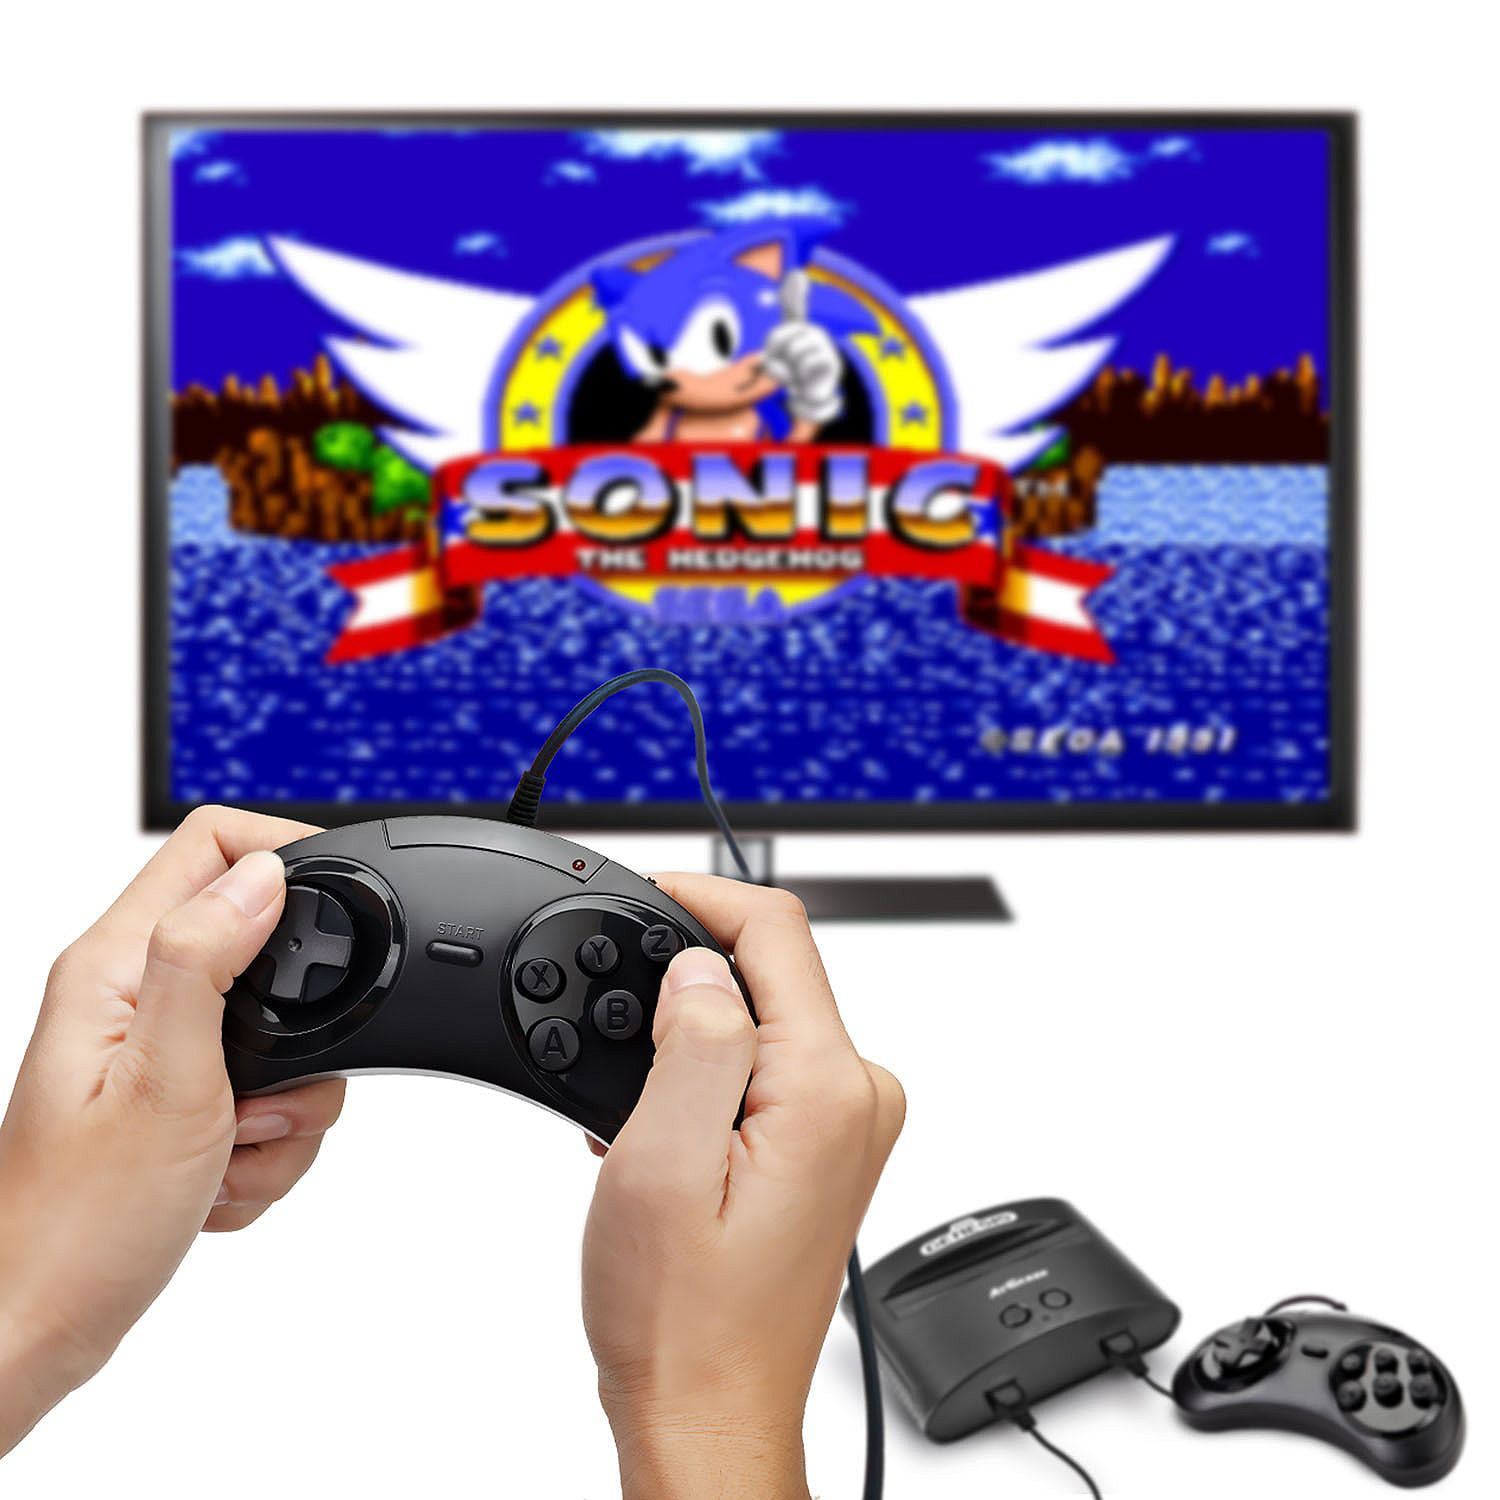 Sonic and Knuckles  SSega Play Retro Sega Genesis / Mega drive video games  emulated online in your browser.